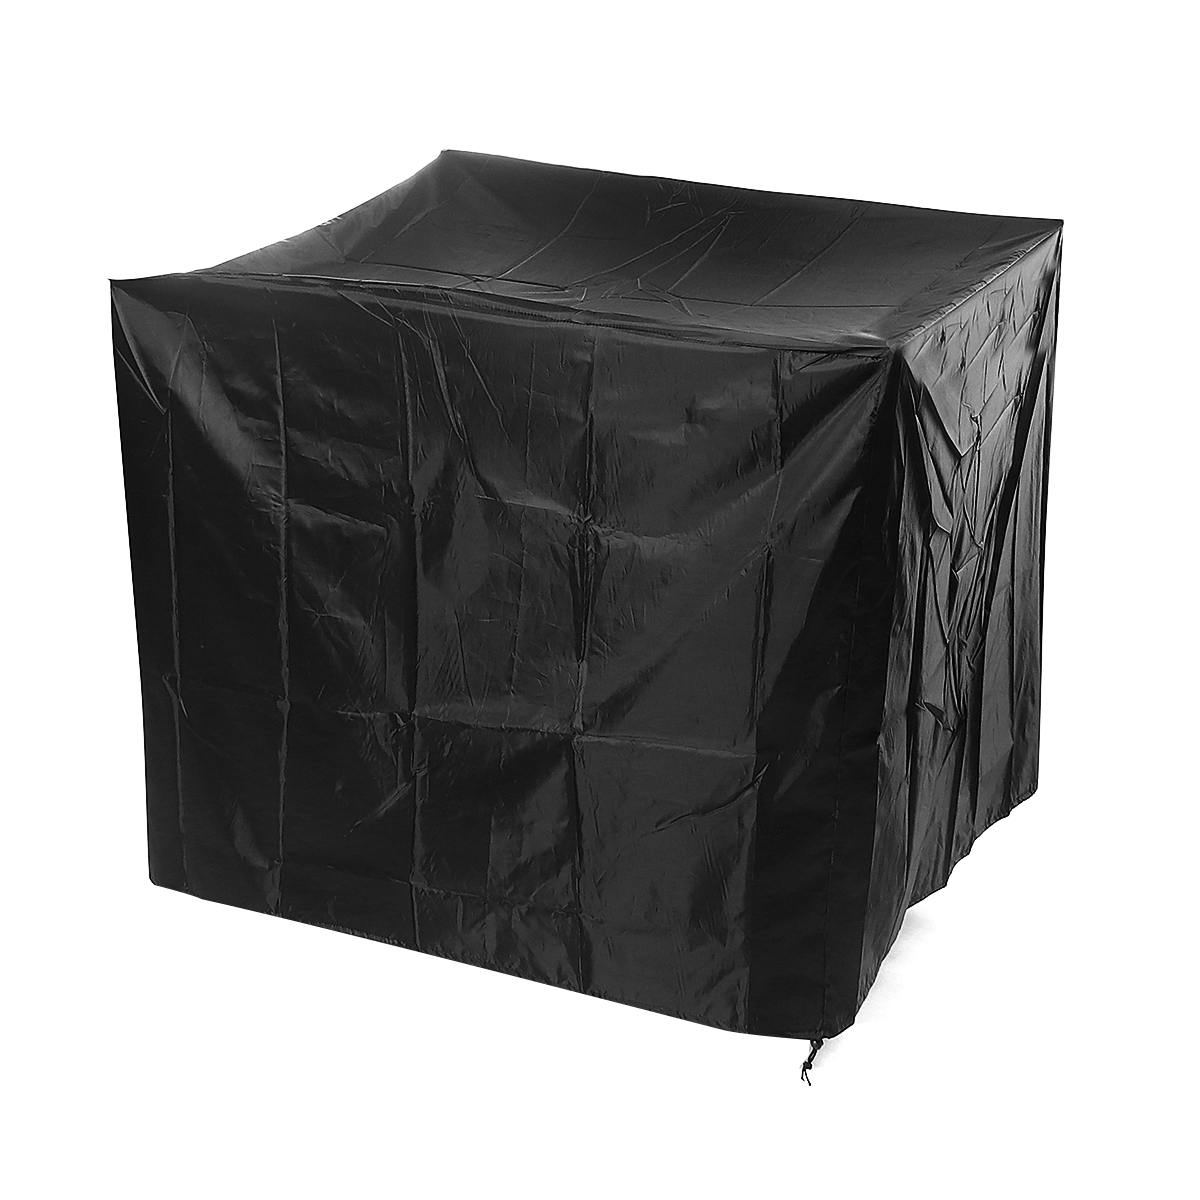 Waterproof-Barbecue-Grill-Cover-for-Weber-7146-Performer-Premium-and-Deluxe-1576280-5